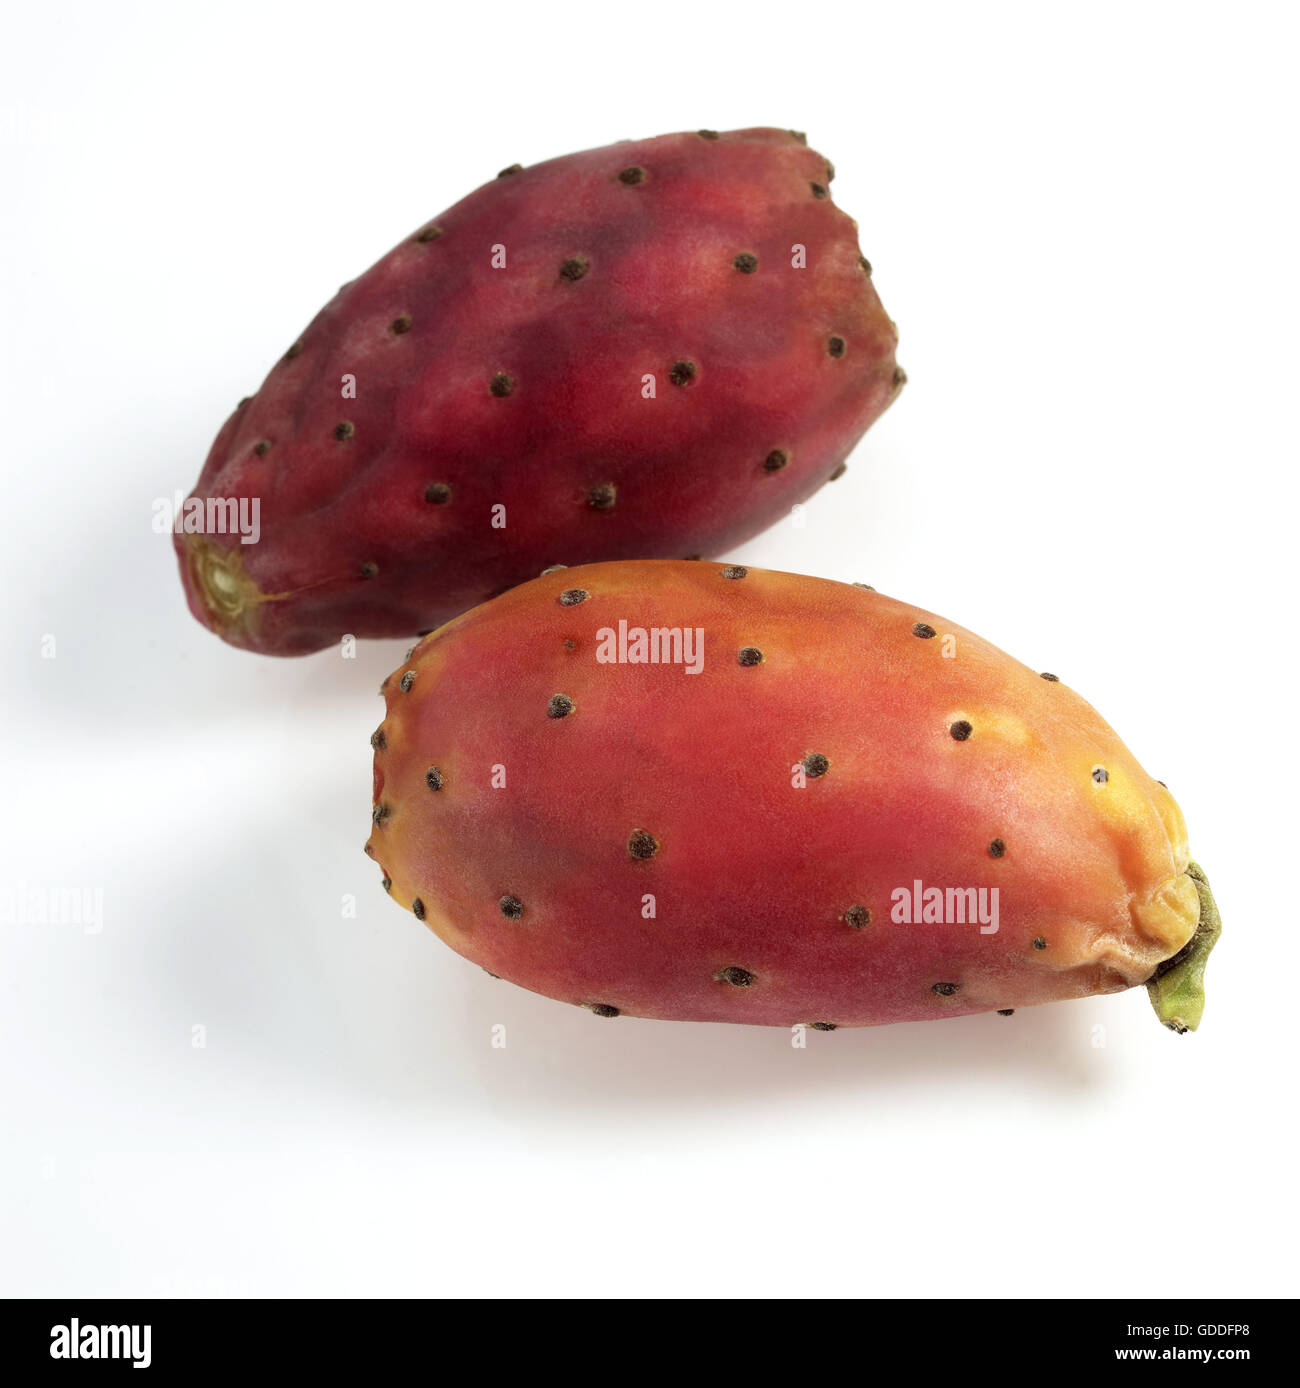 Prickly Pear Fruits from Cactus, opuntia sp. Stock Photo